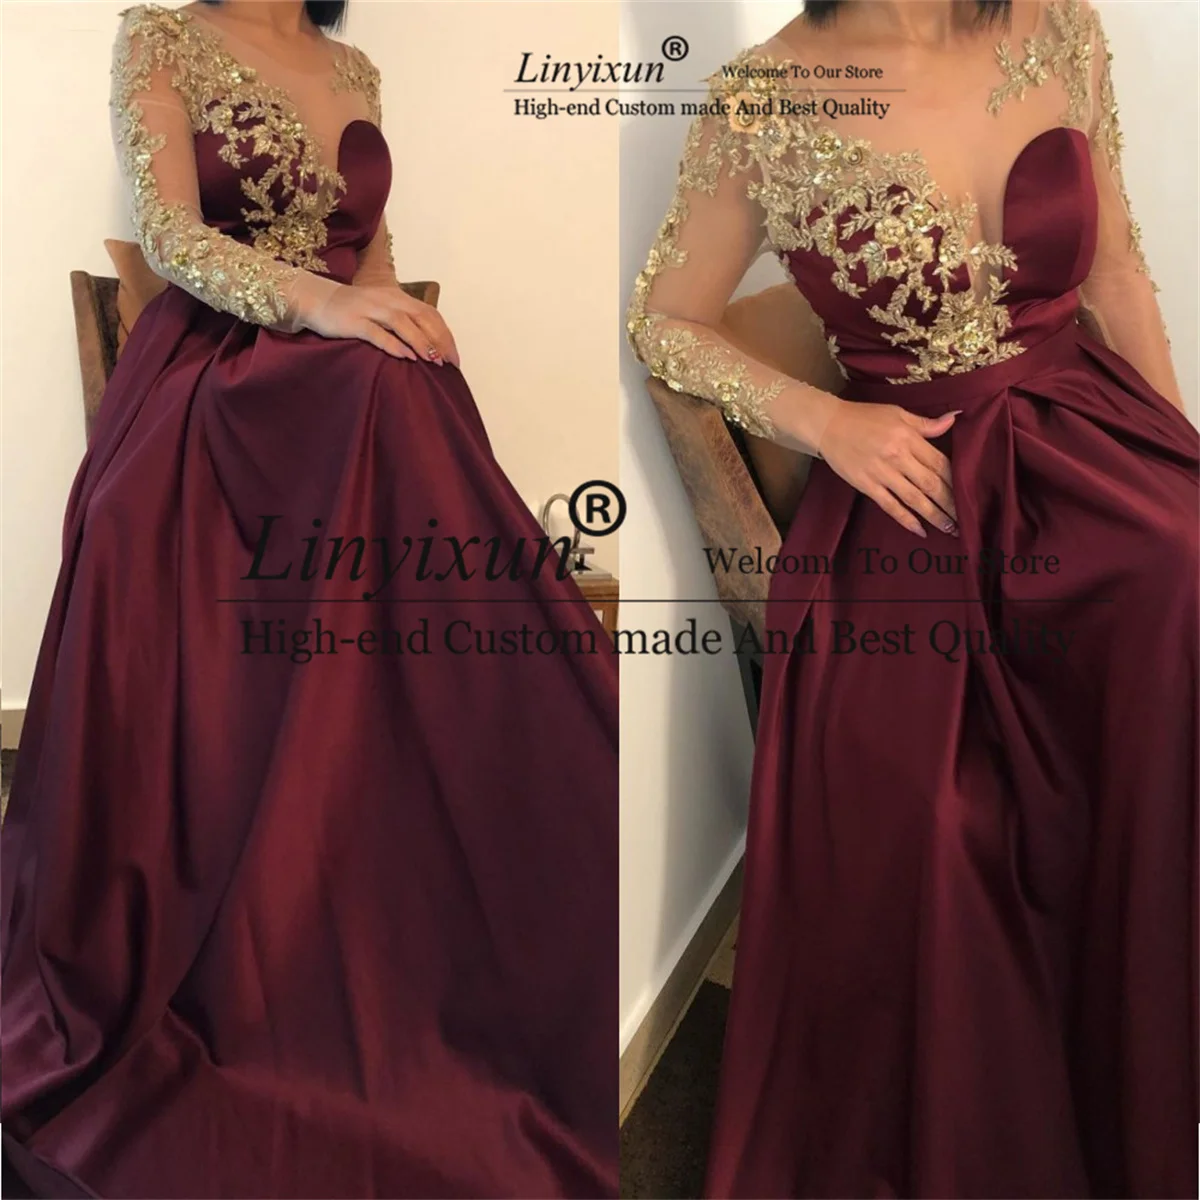 

Elegant Burgundy A-Line Prom Dresses Illusion Long Sleeve Formal Evening Party Gowns Gold Flowers Lace Satin Robe De Soiree